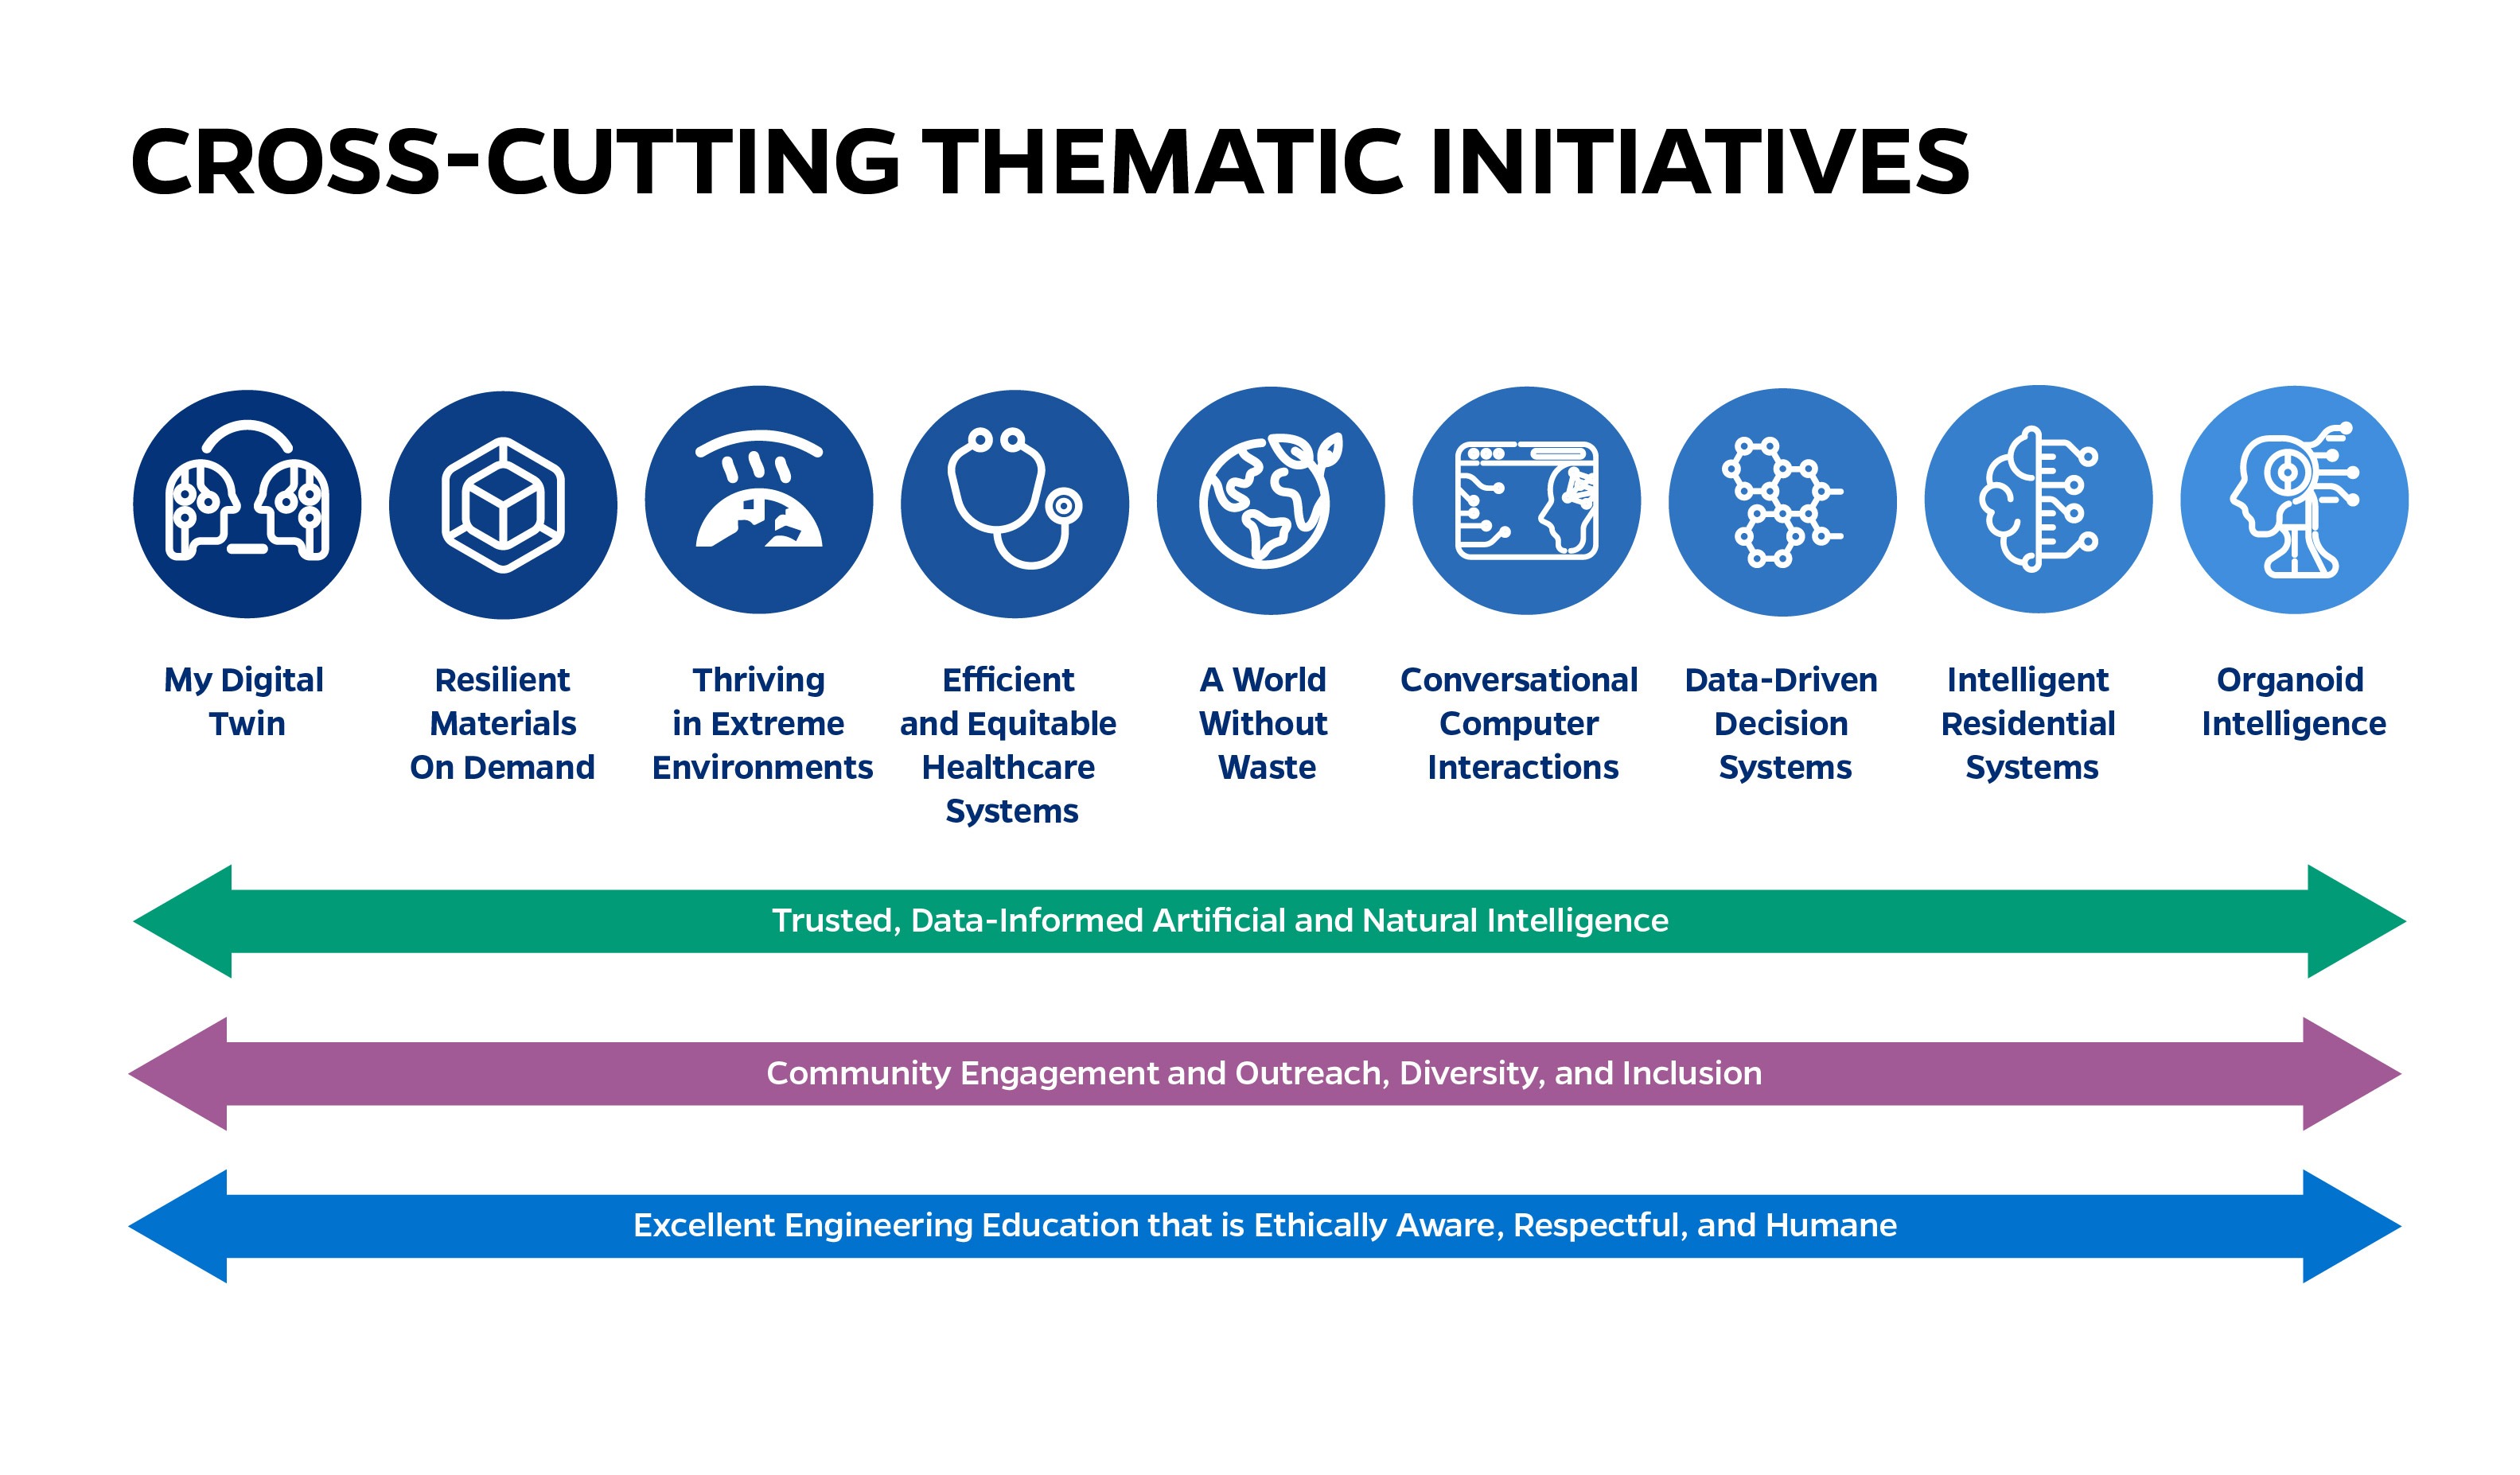 Graphic showing cross-cutting themes of AI, equity, biomedical engineering, and the environment